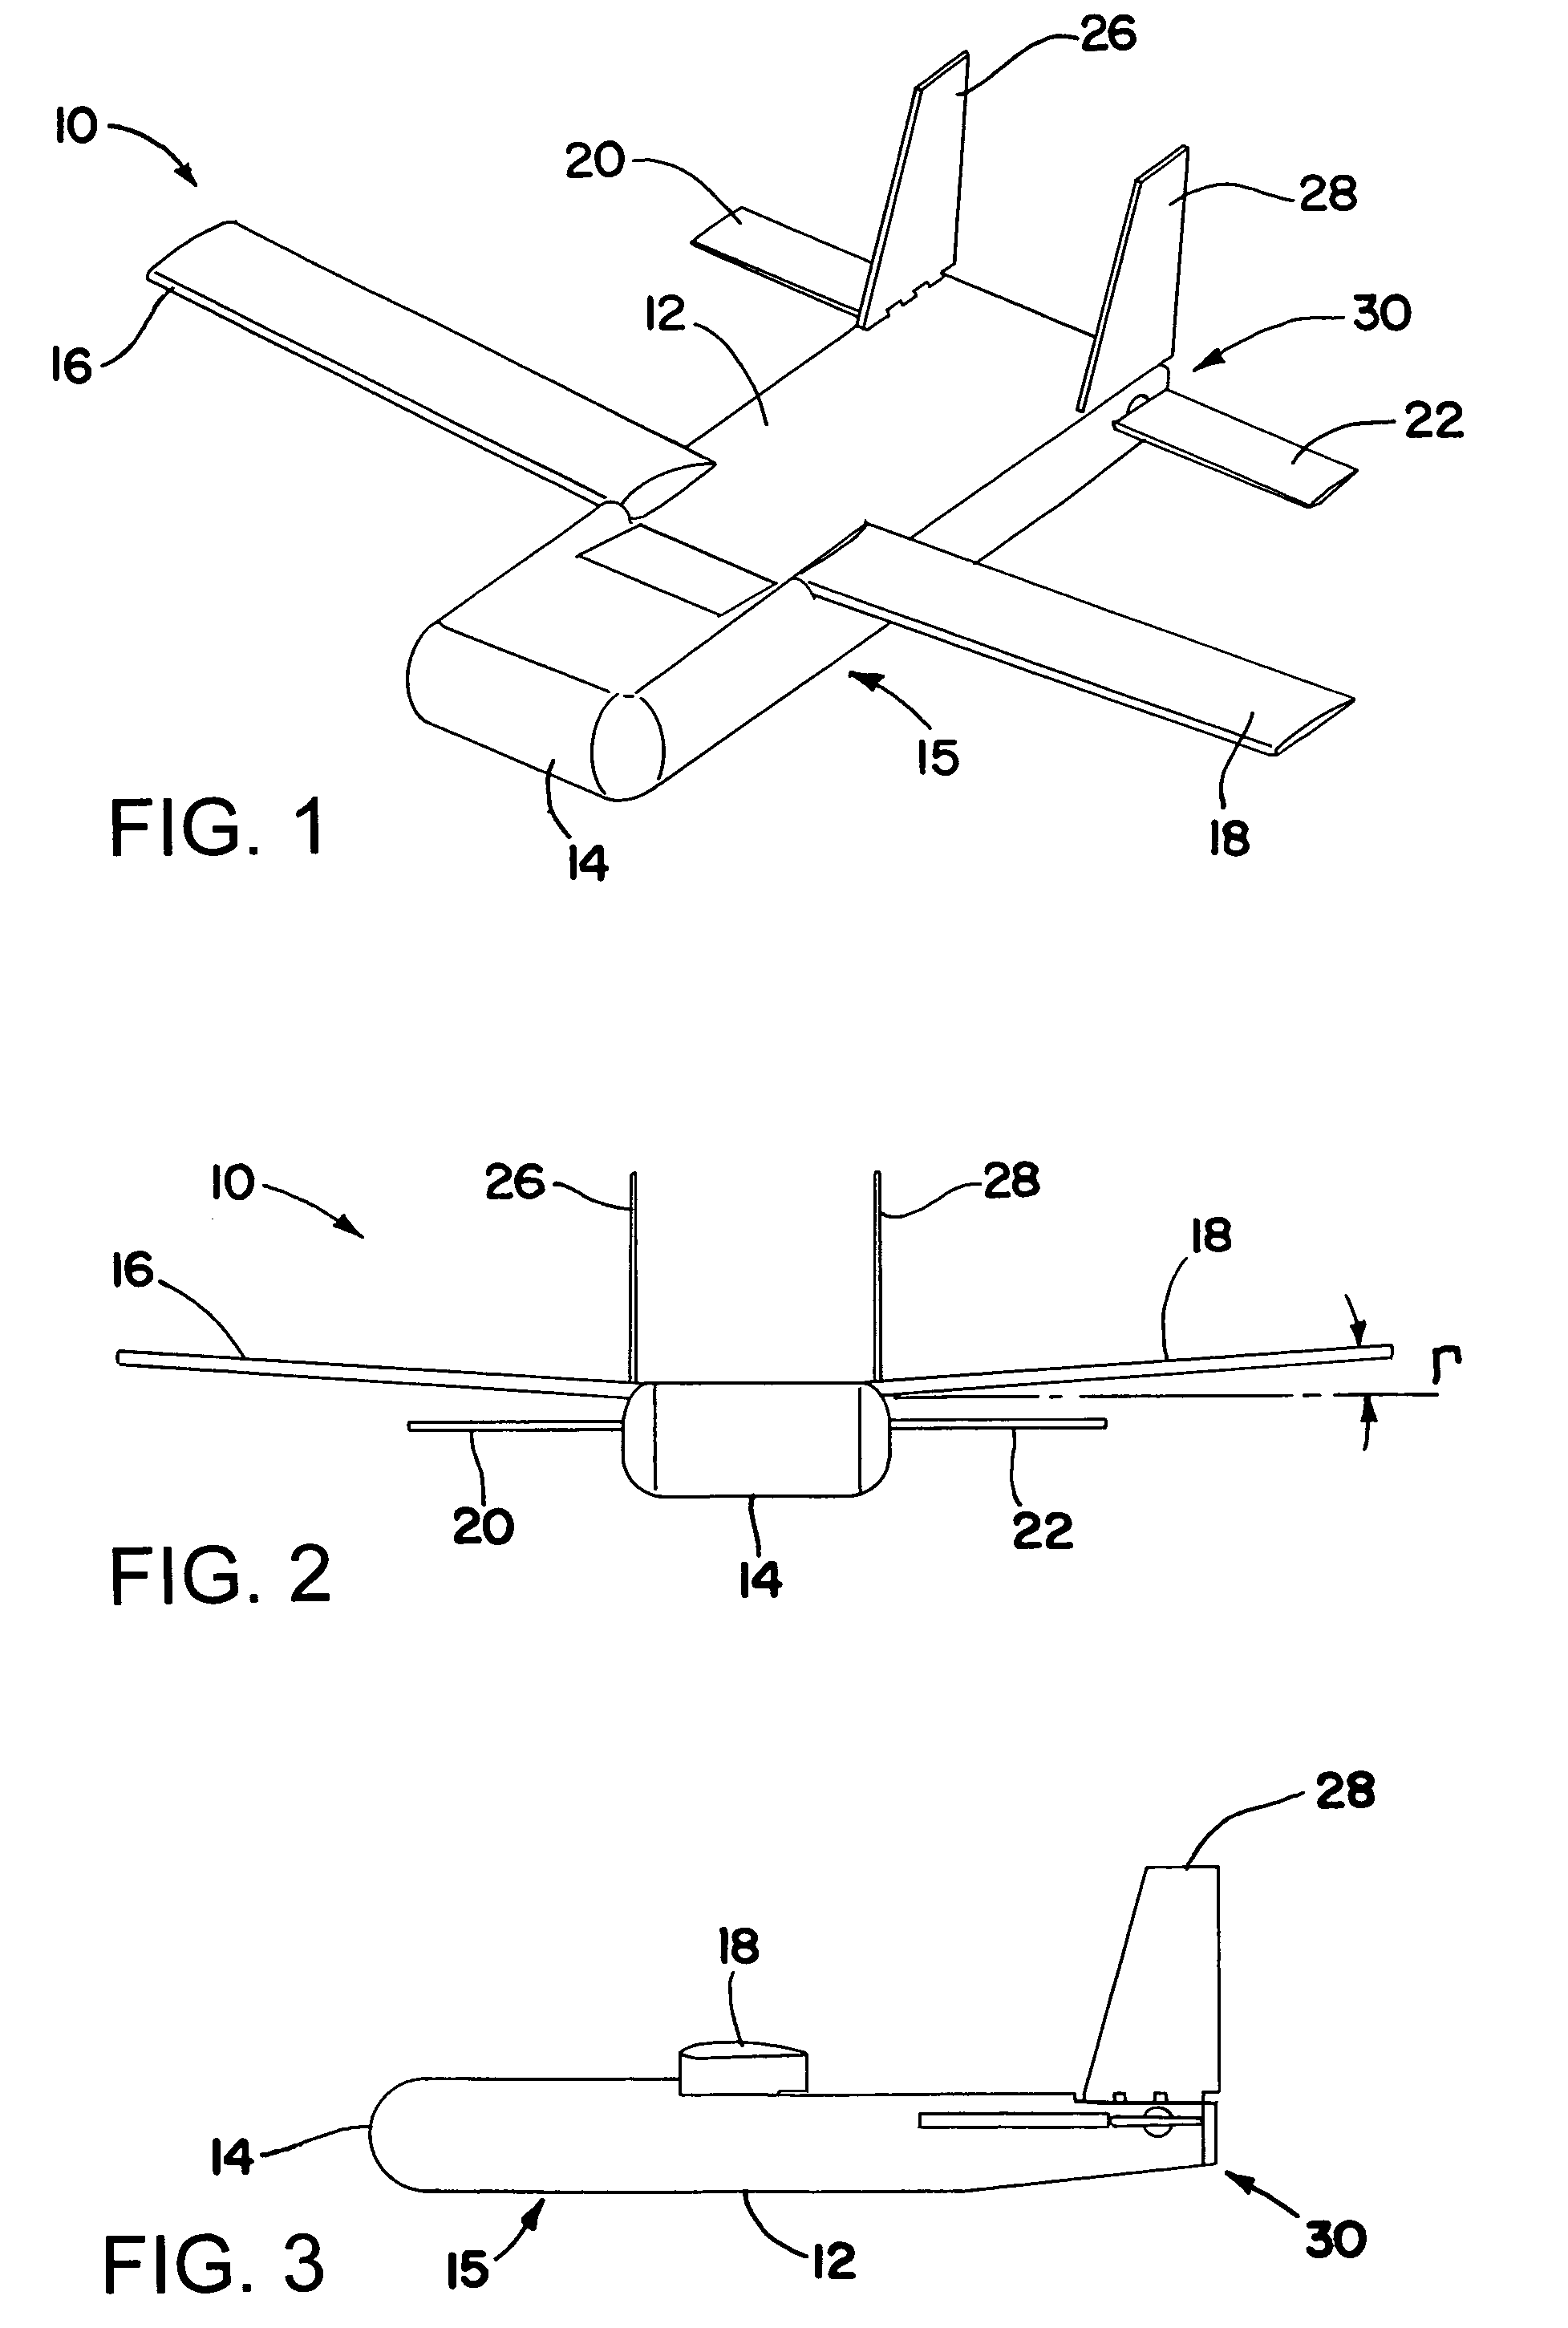 Air-launchable aircraft and method of use